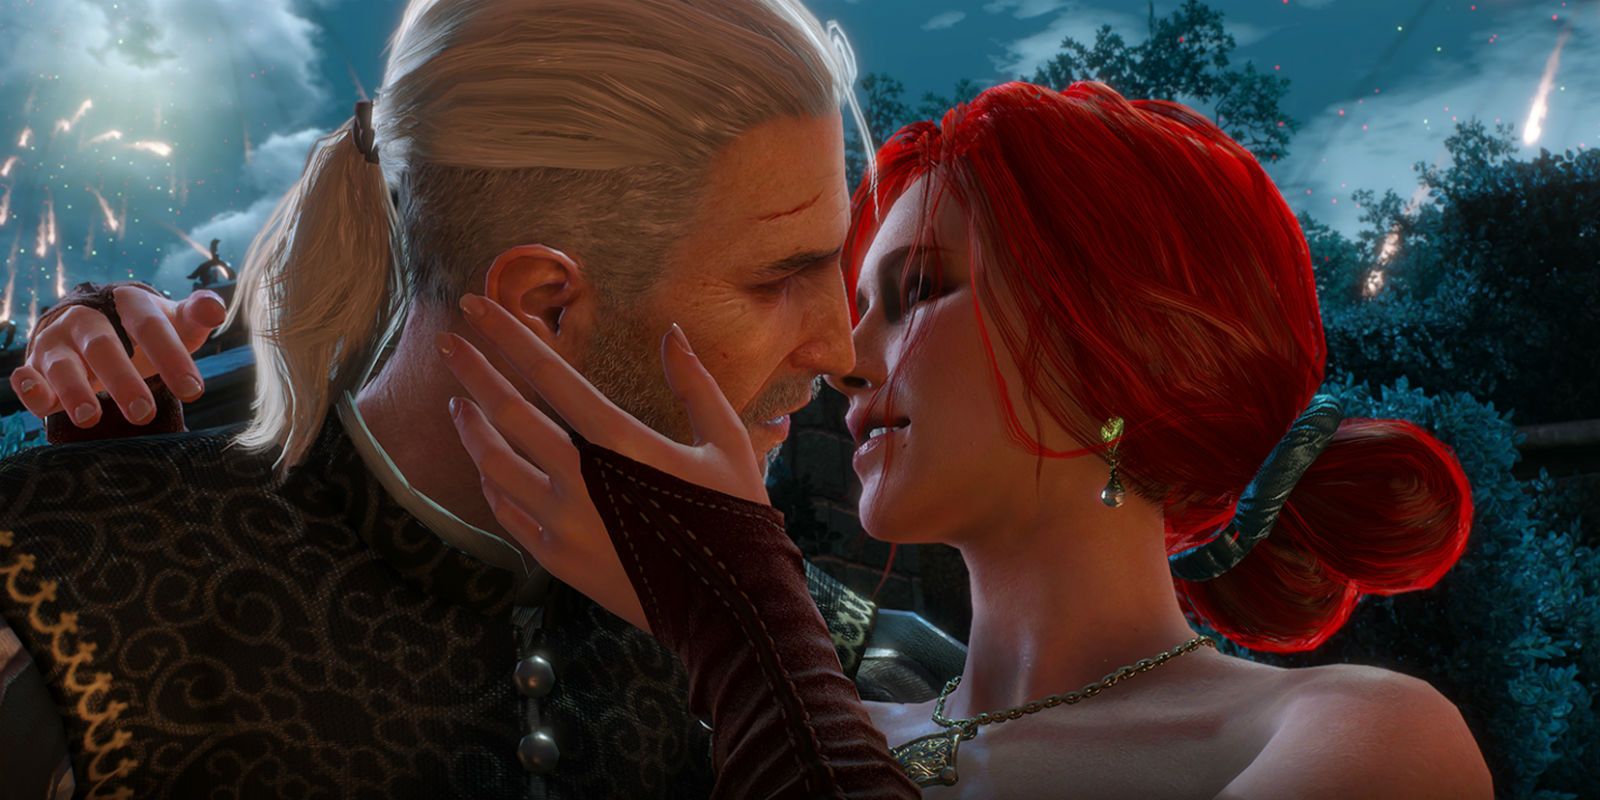 Triss and Geralt kiss in the maze in The Witcher